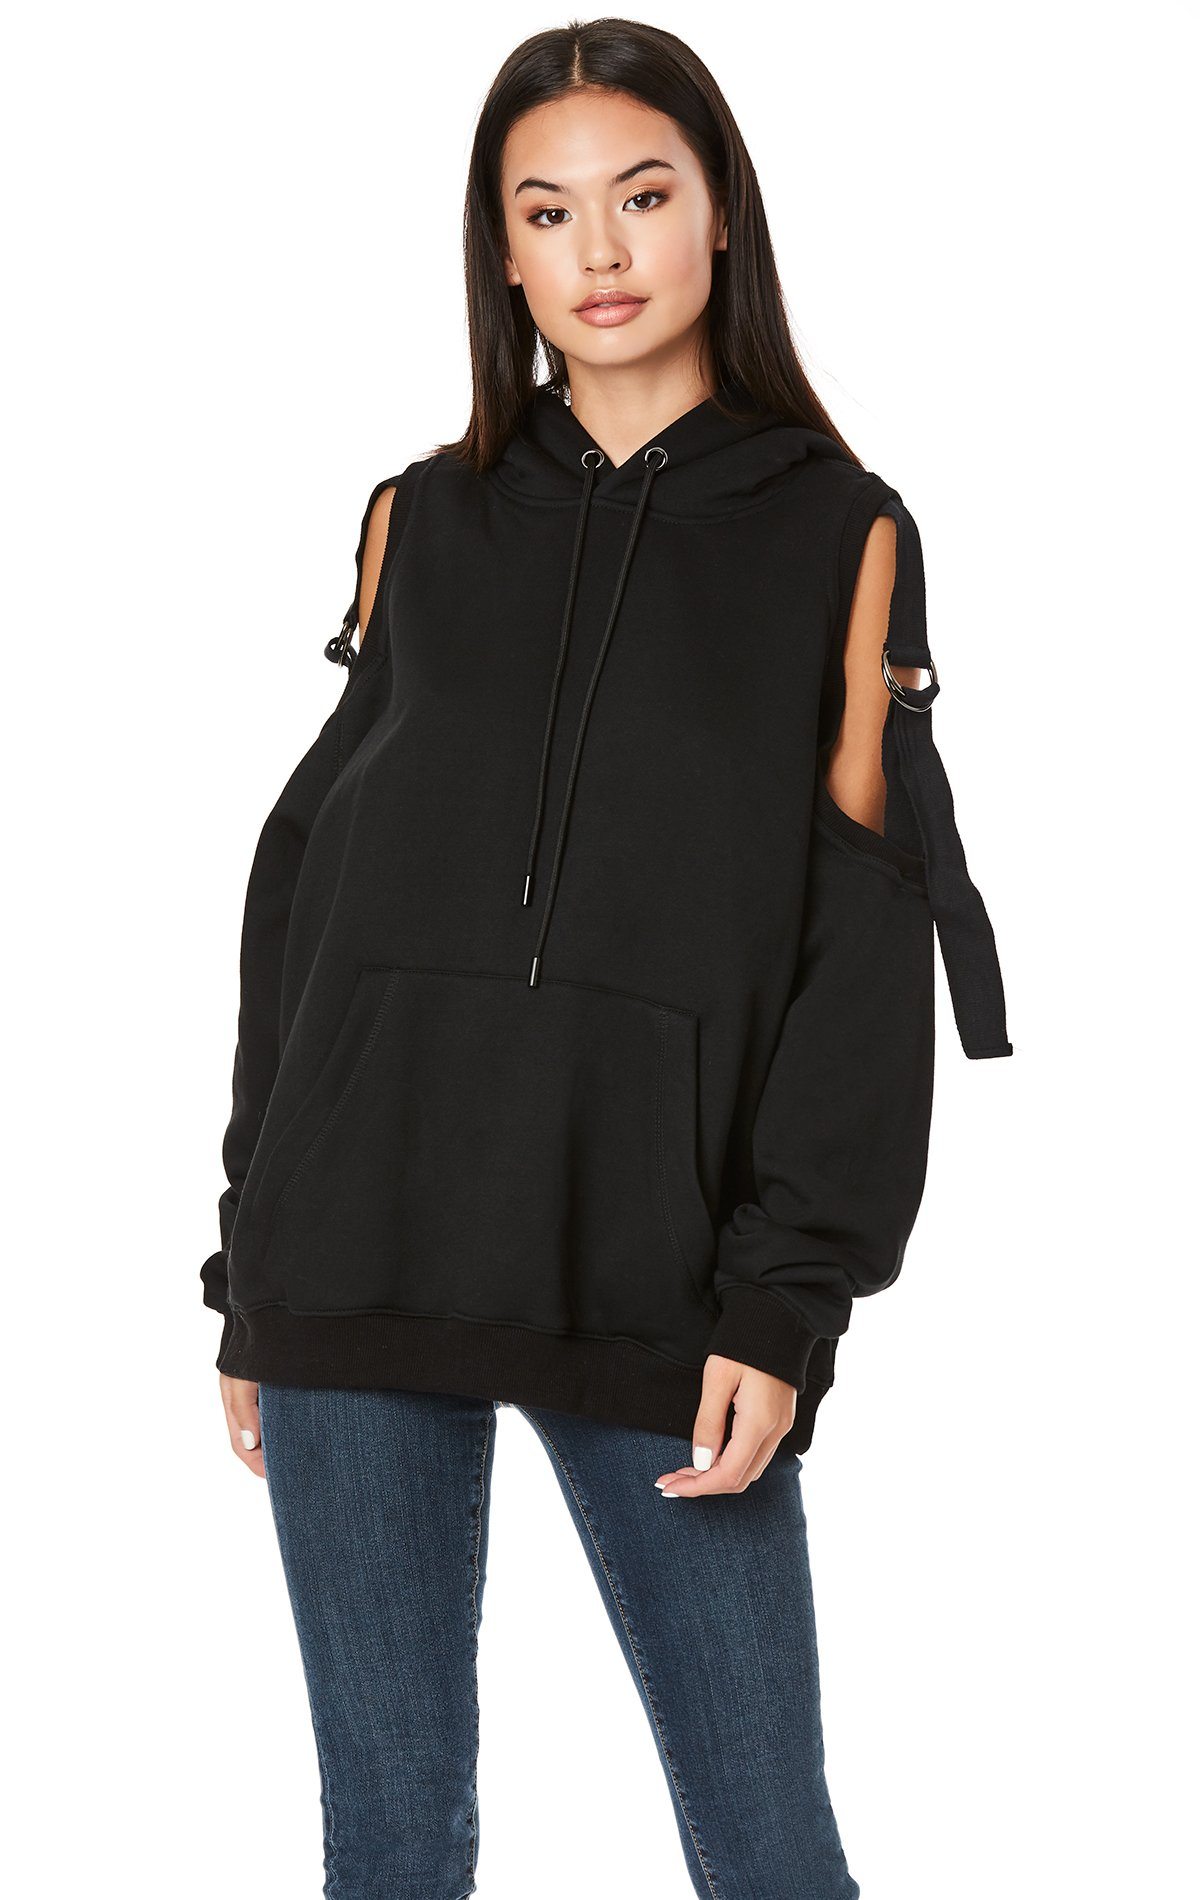 HOODIE WITH CUTOUT SHOULDER